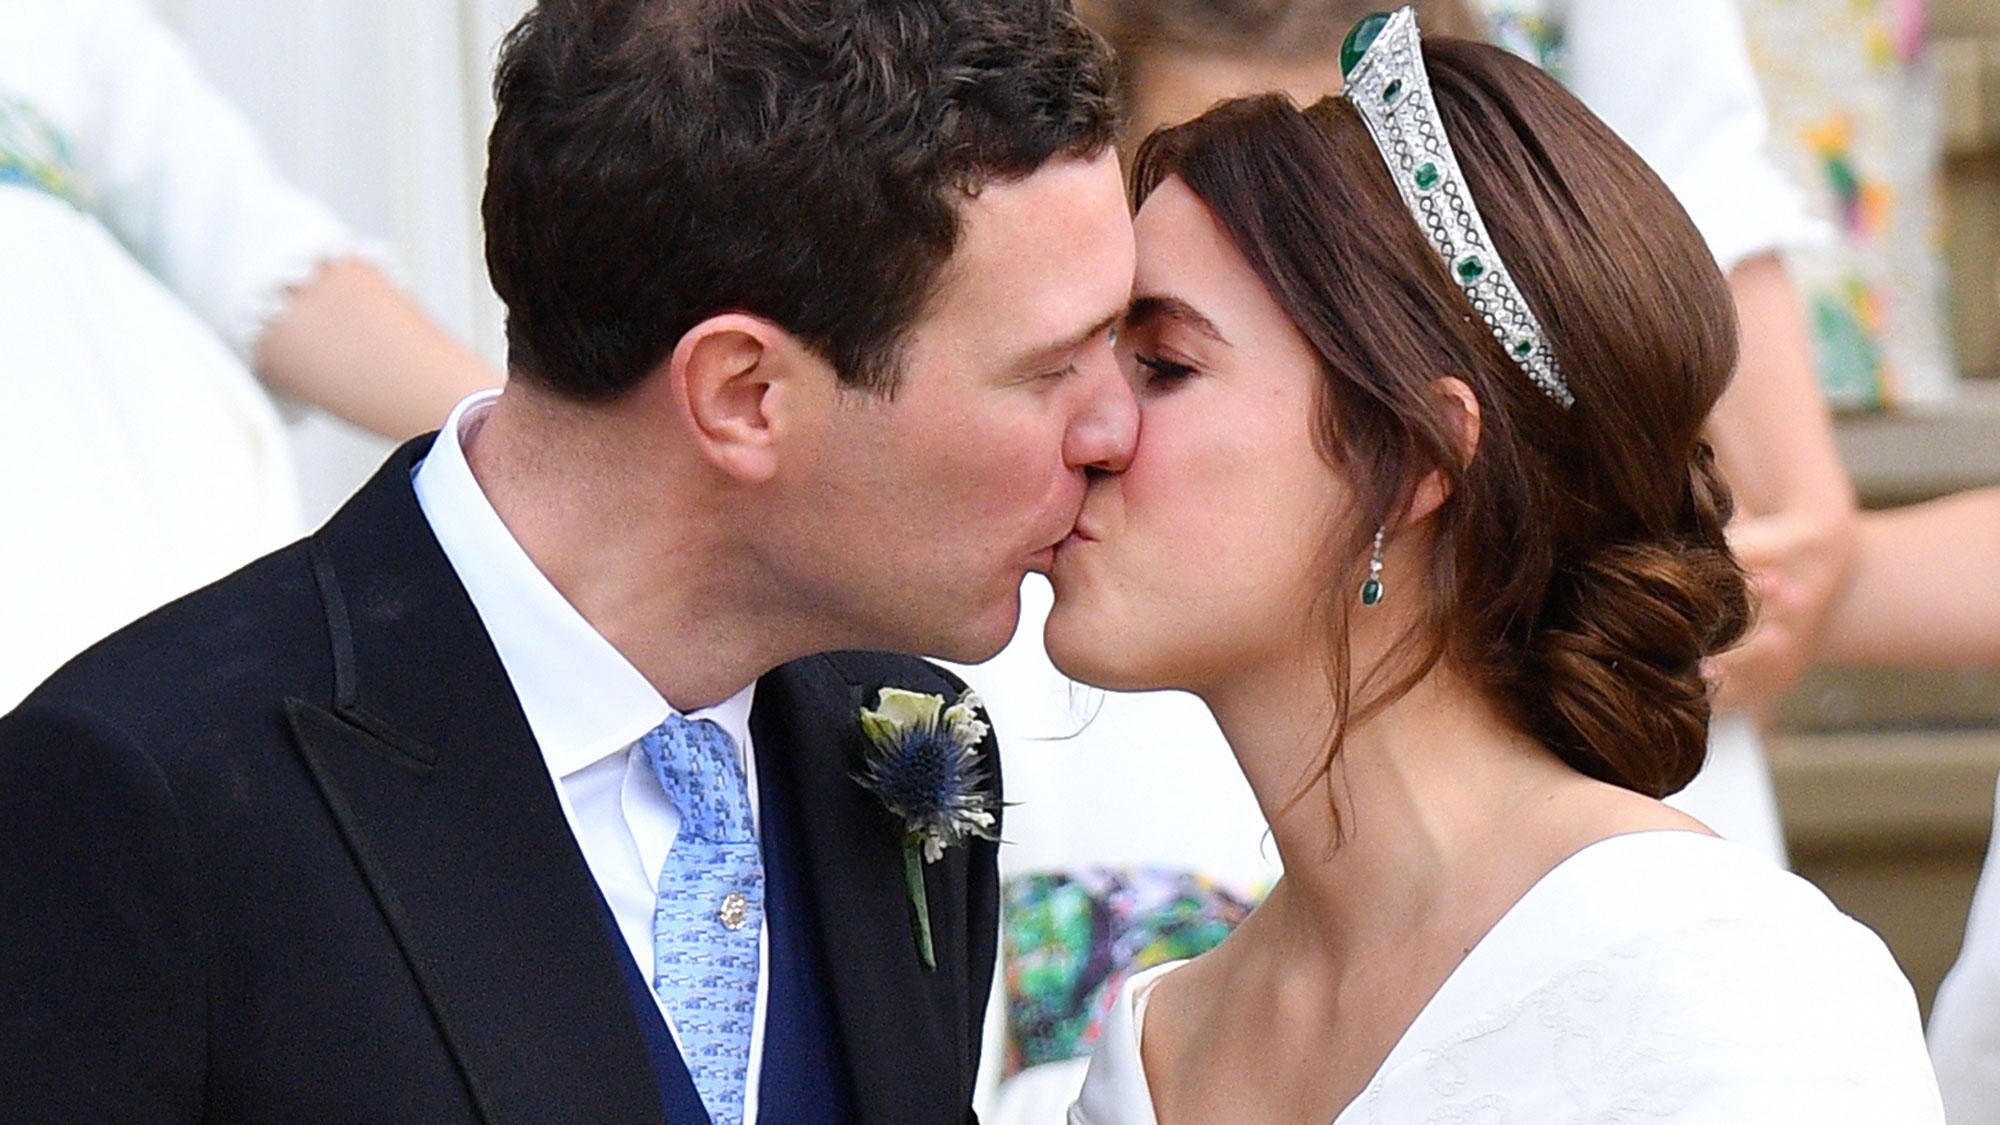 Princess Eugenie had this sweet message embroidered on wedding dress